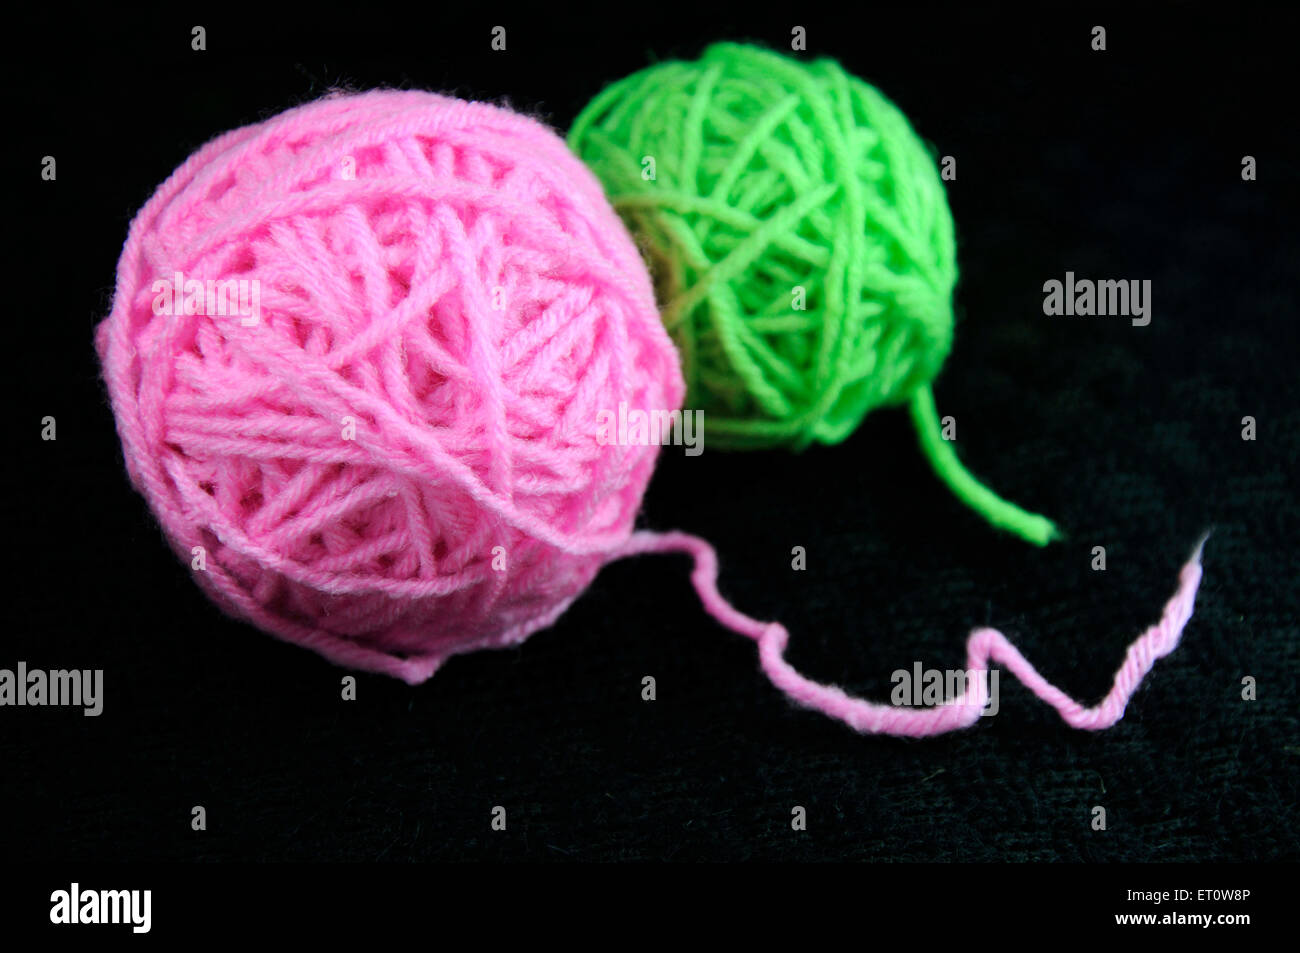 Green and pink wool yarn ball on black background India Asia Stock Photo